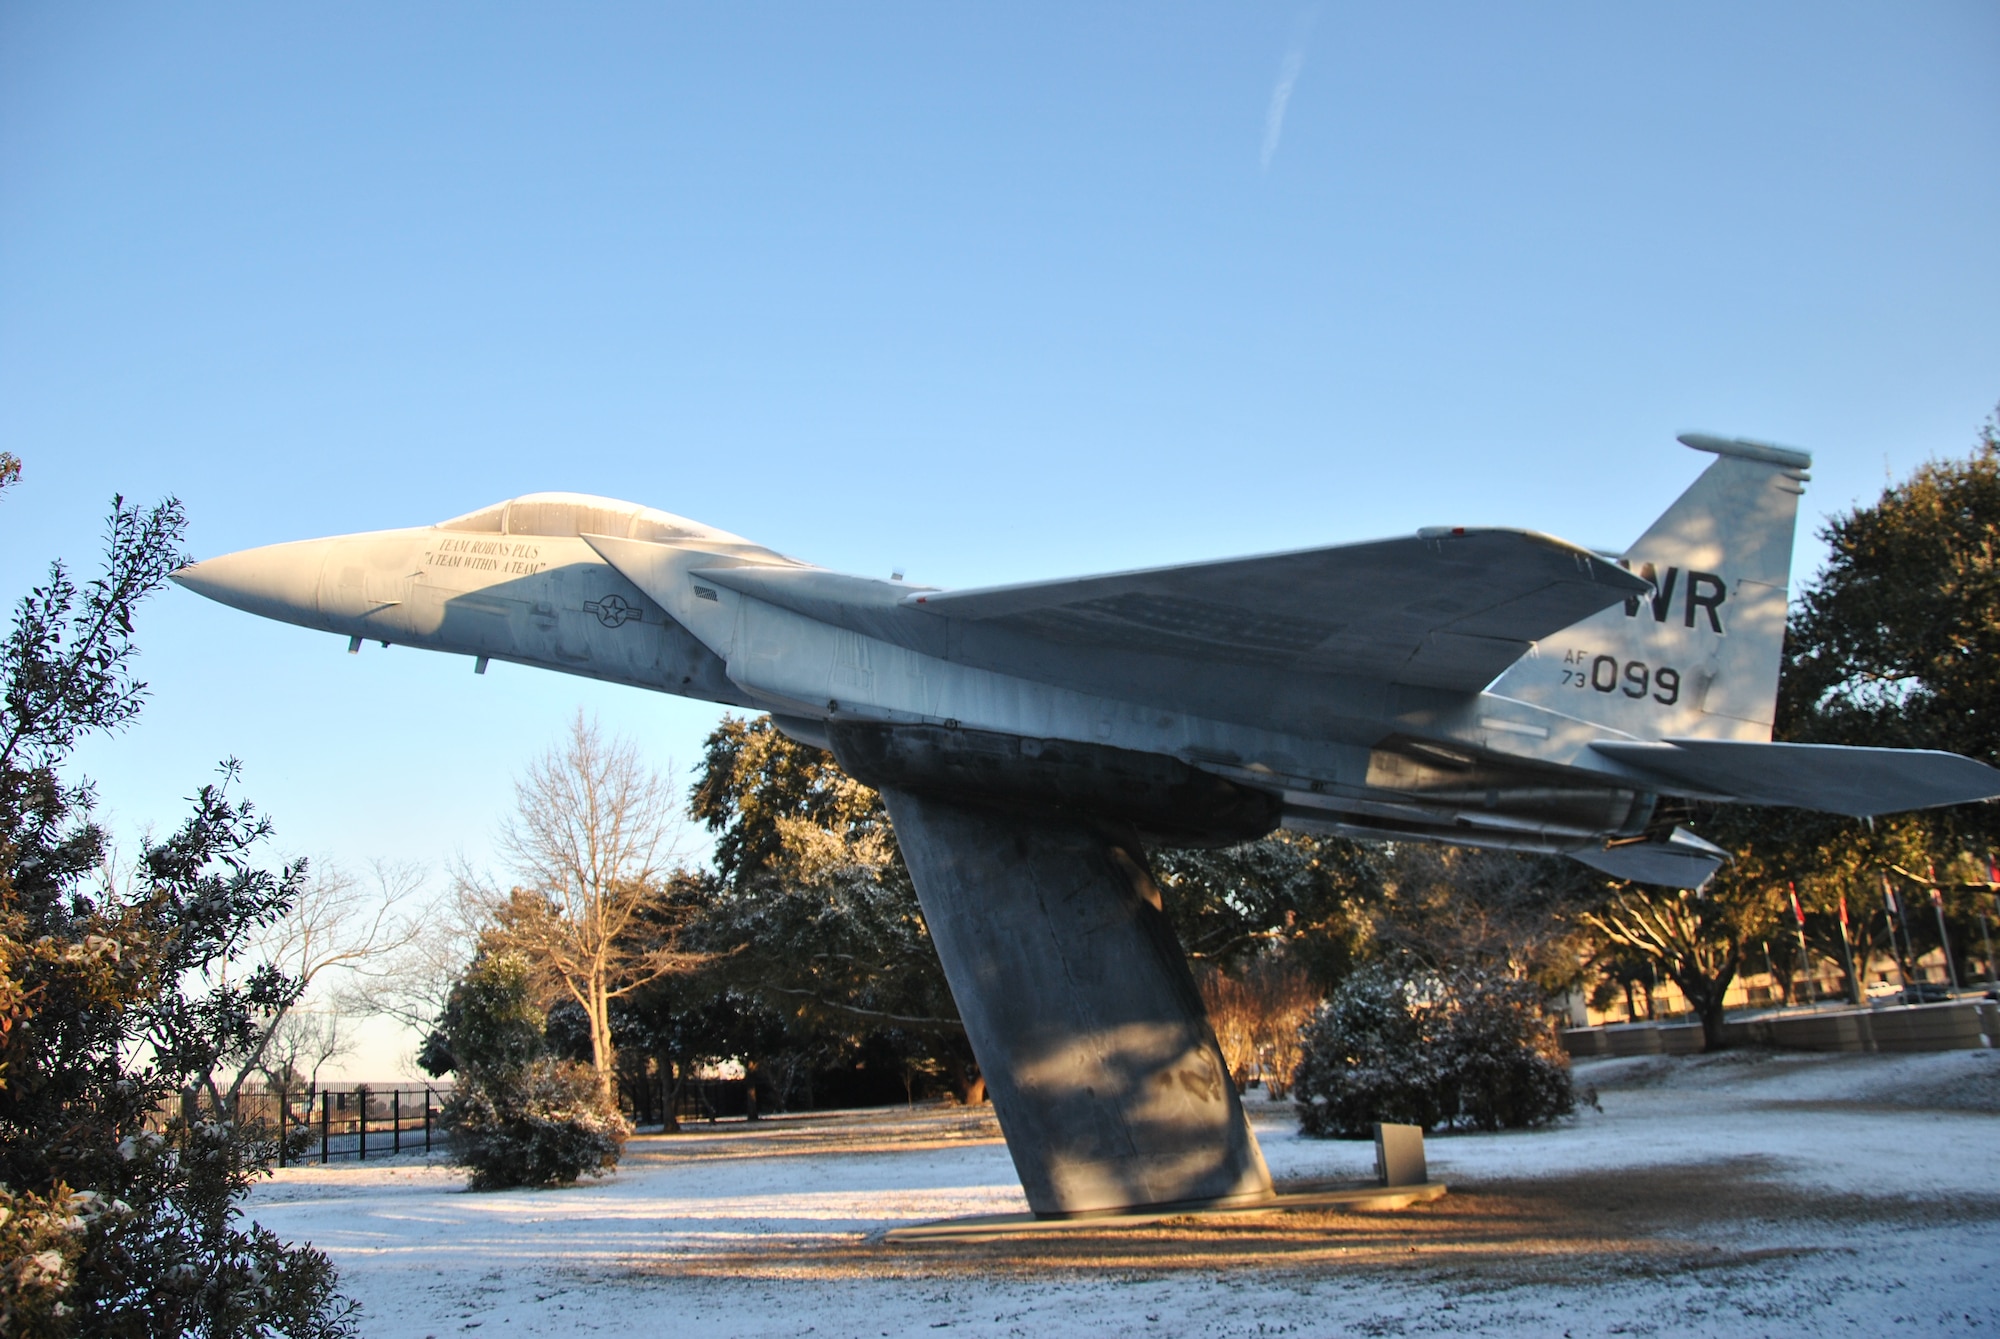 The F-15 display in front of Bldg. 215 near the main gate was still covered in a sheet of ice Thursday when employees returned to work. (U.S. Air Force photo by Ray Crayton)